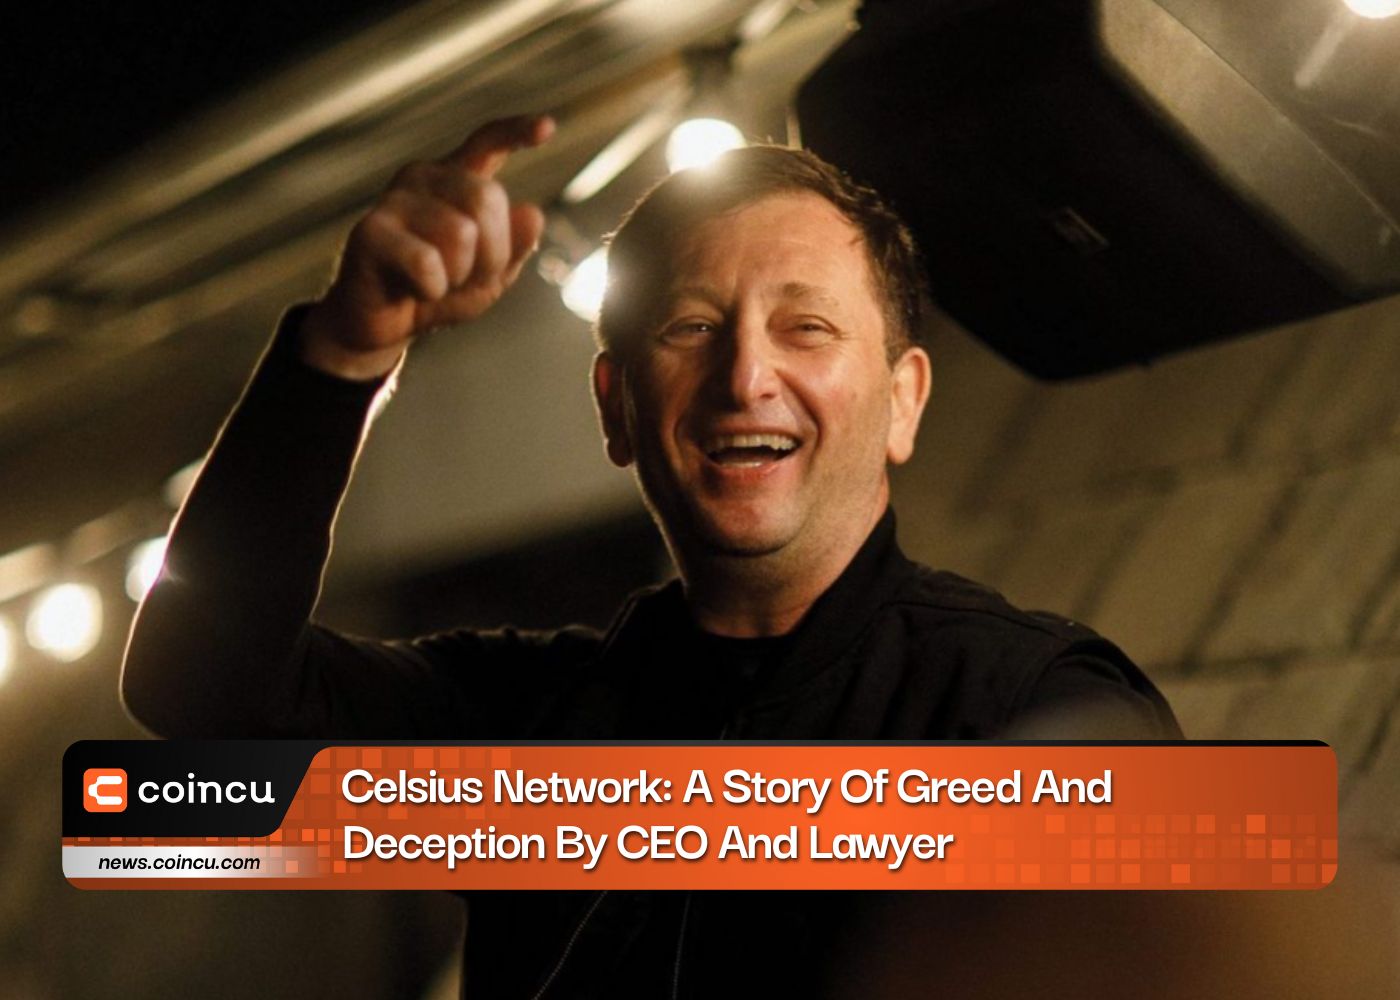 Celsius Network: A Story Of Greed And Deception By CEO And Lawyer